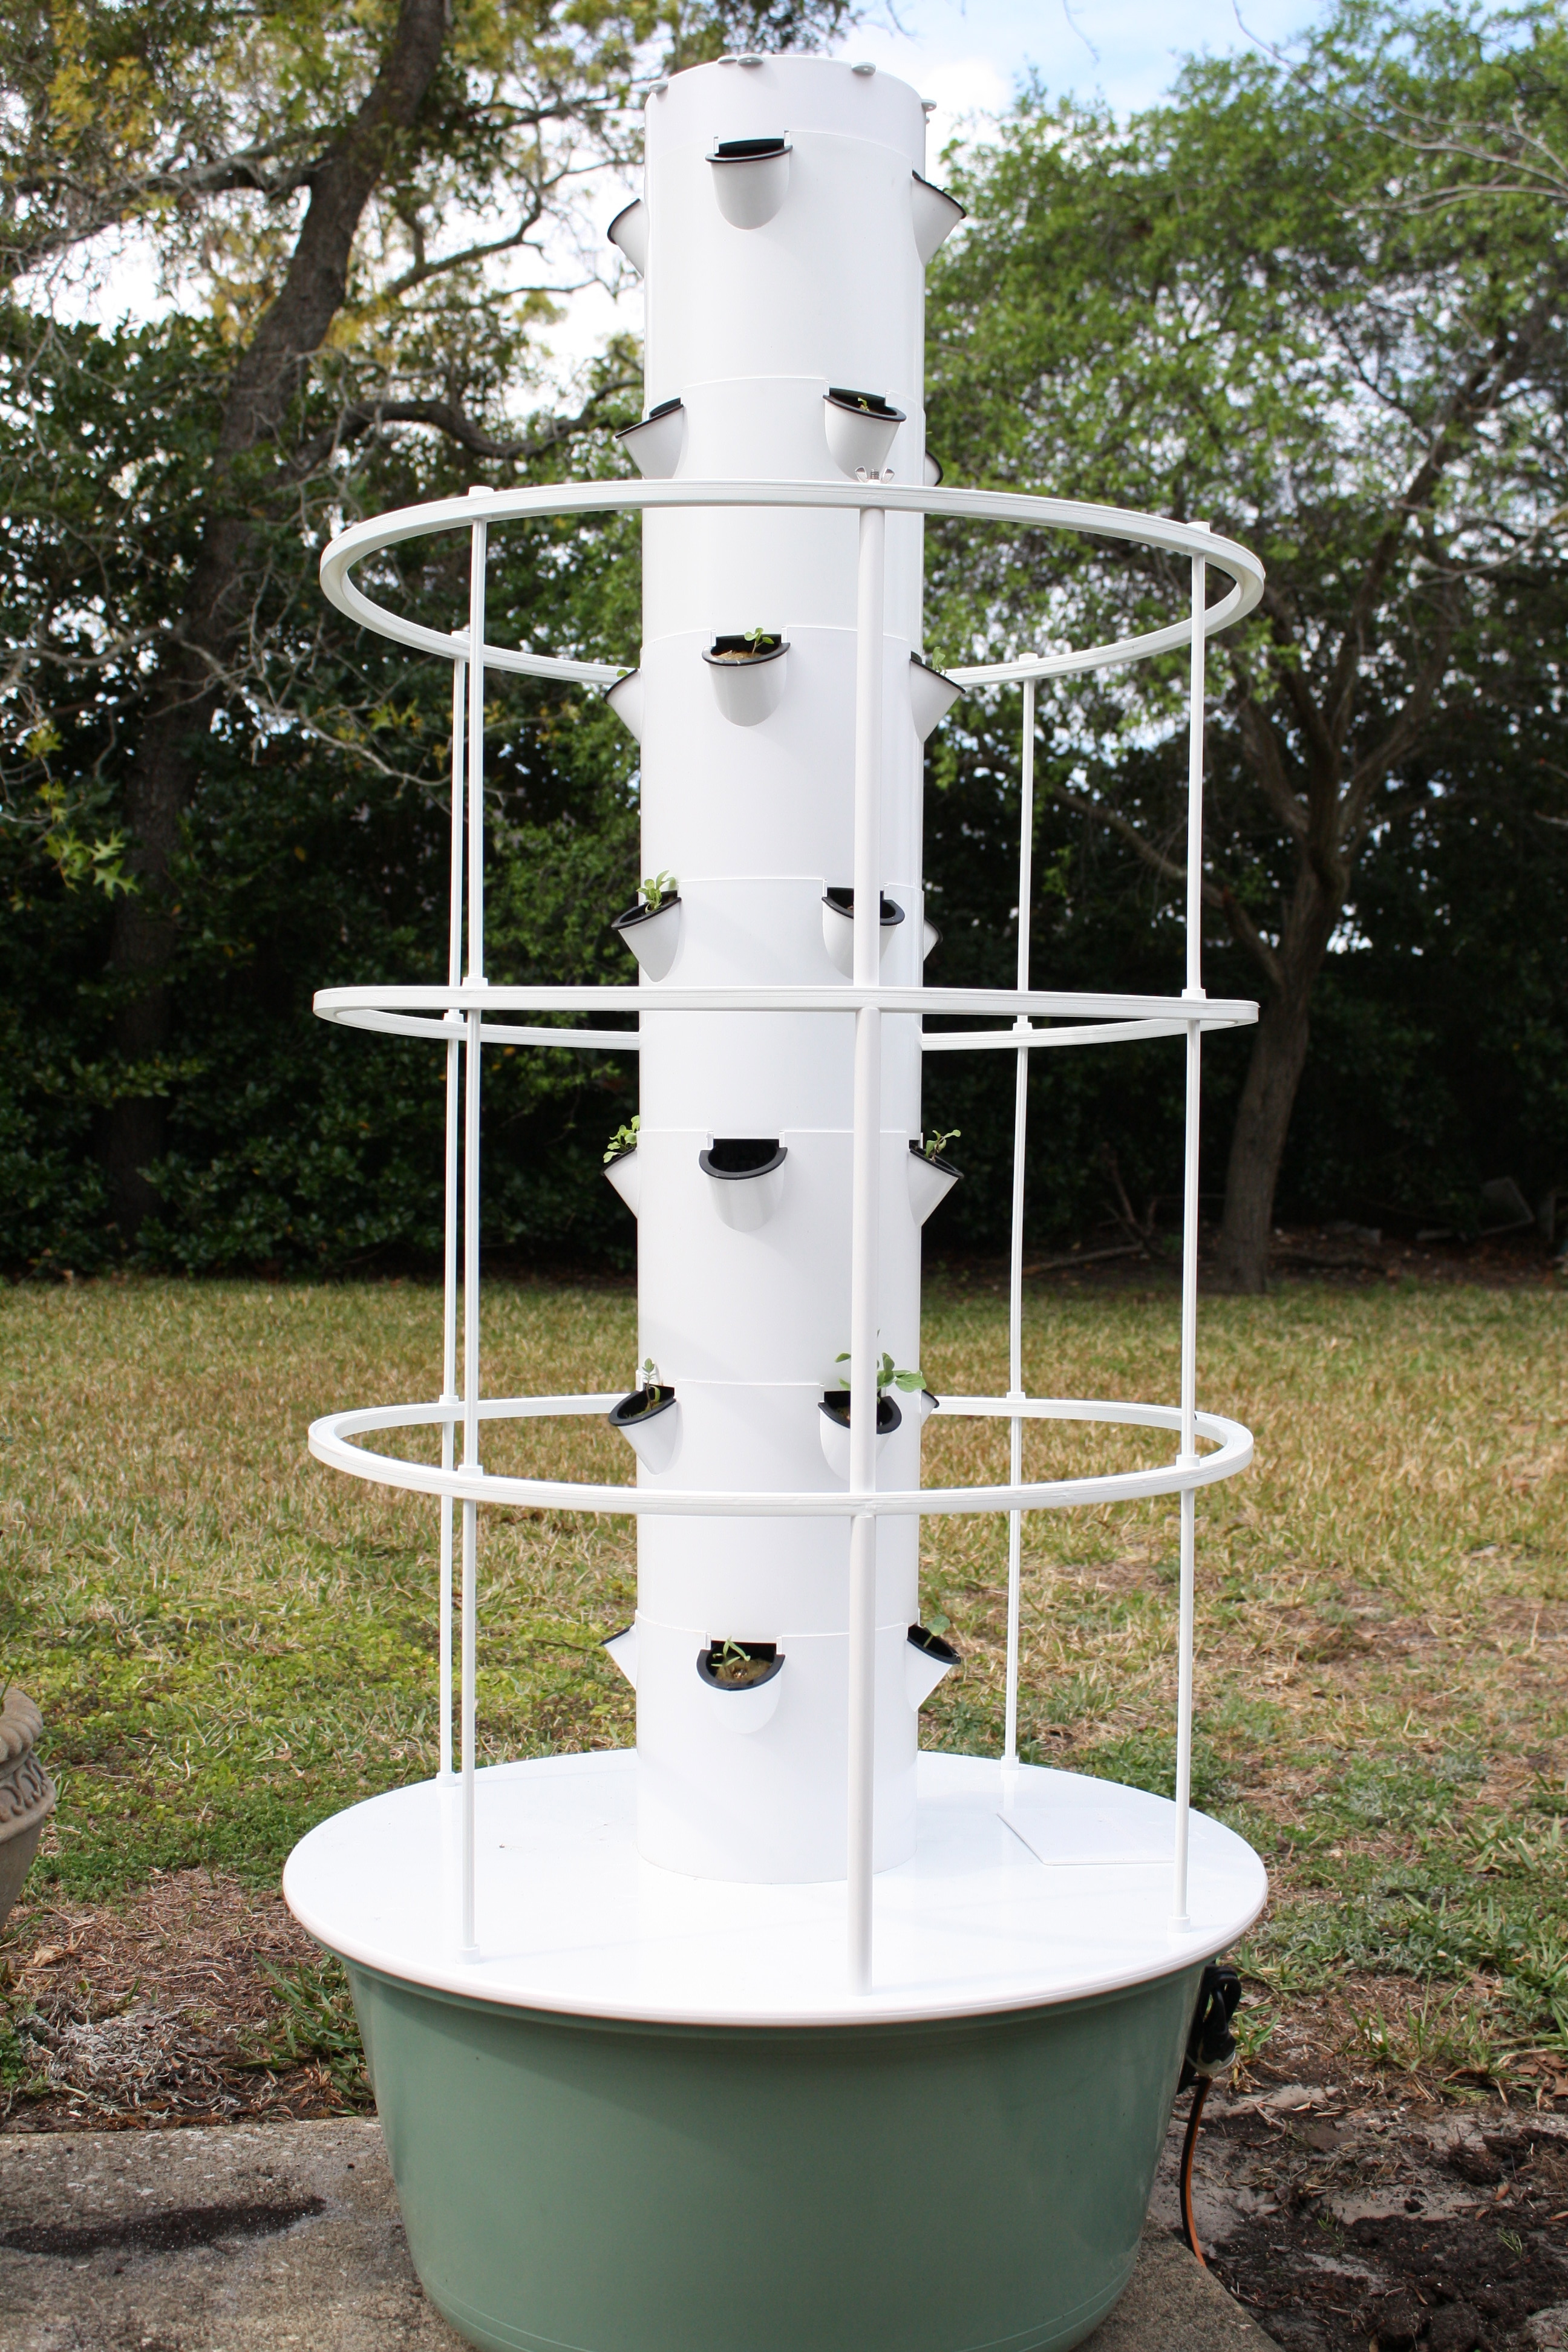 2013 | Aeroponic Tower Garden Review | Page 2